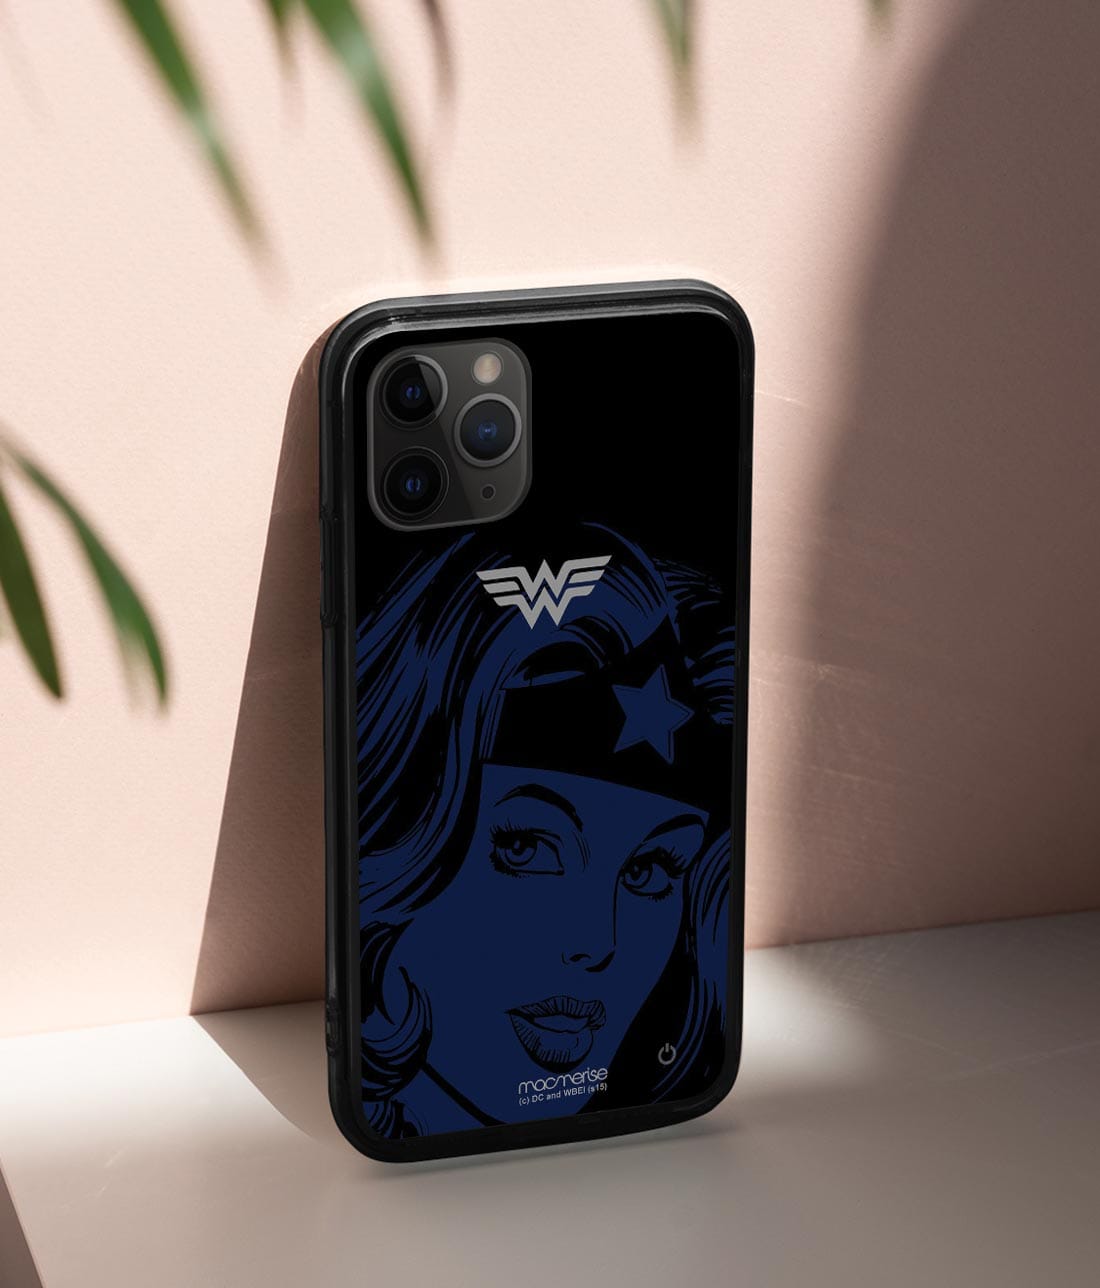 Silhouette Wonder Woman - Lumous LED Phone Case for iPhone 11 Pro